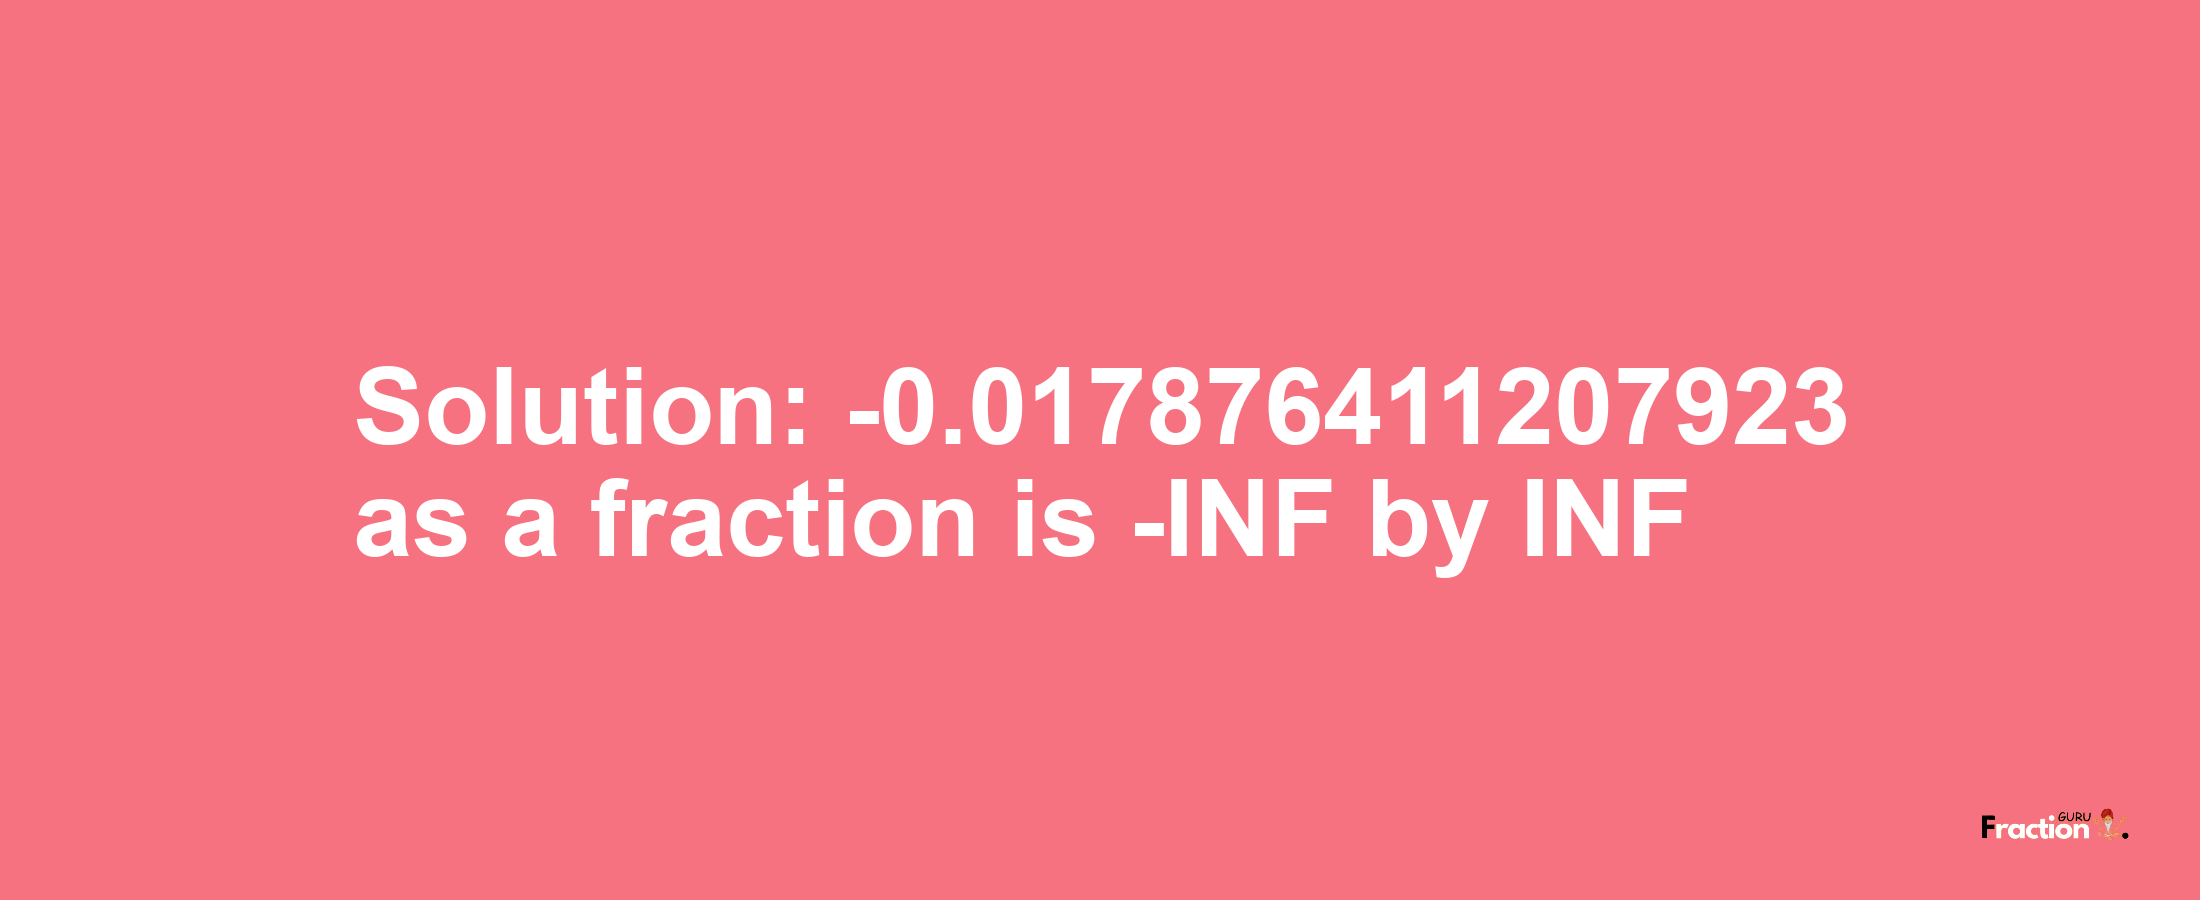 Solution:-0.017876411207923 as a fraction is -INF/INF